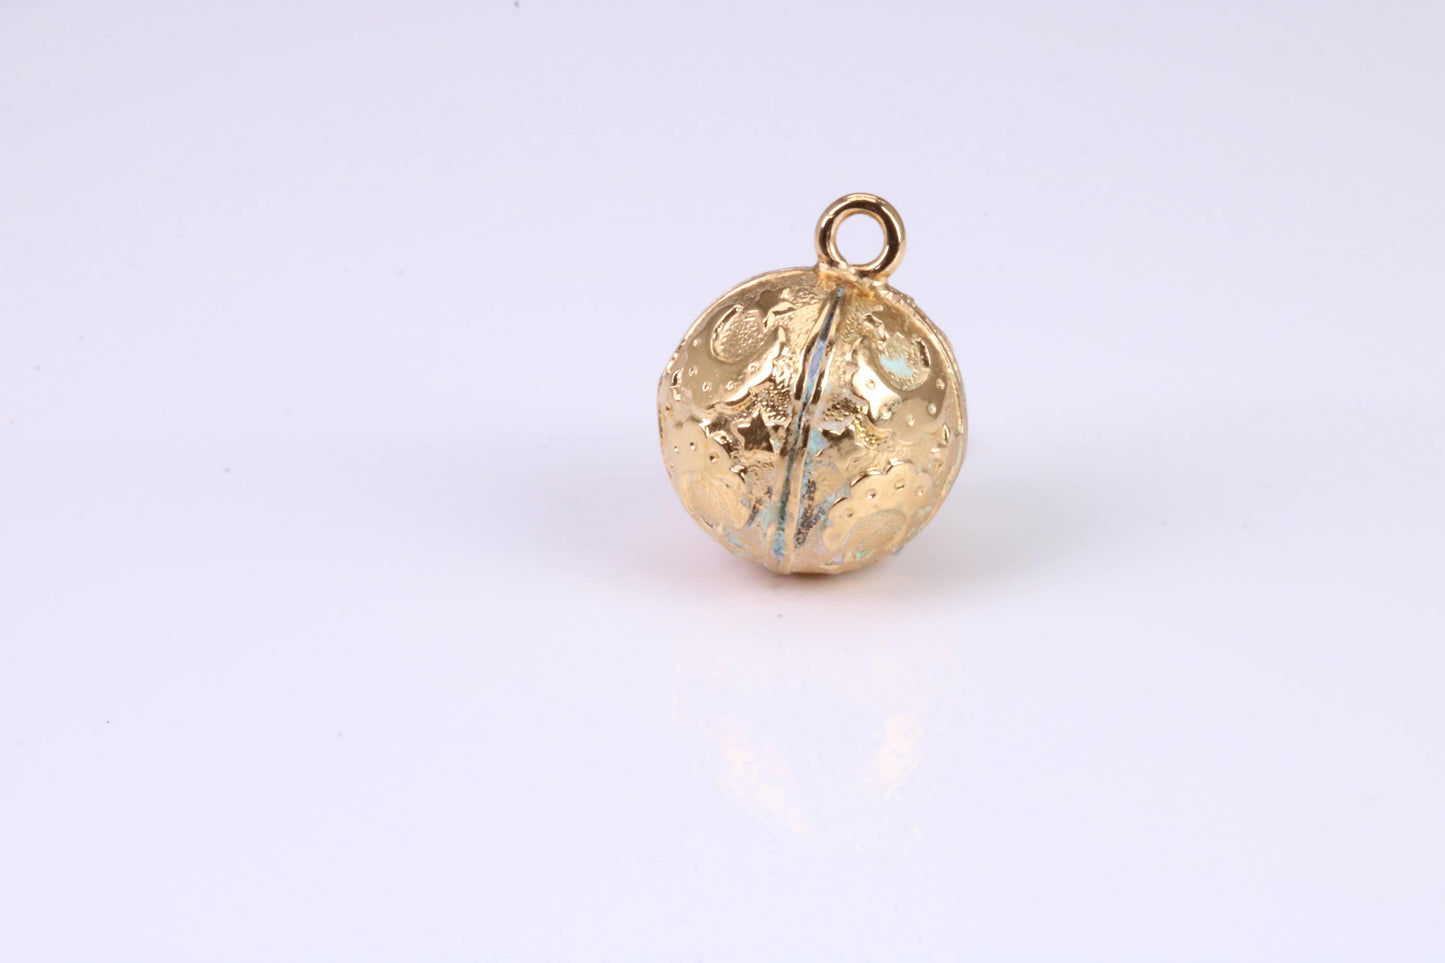 Moon and Star Sphere Charm, Traditional Charm, Made from Solid Yellow Gold, British Hallmarked, Complete with Attachment Link